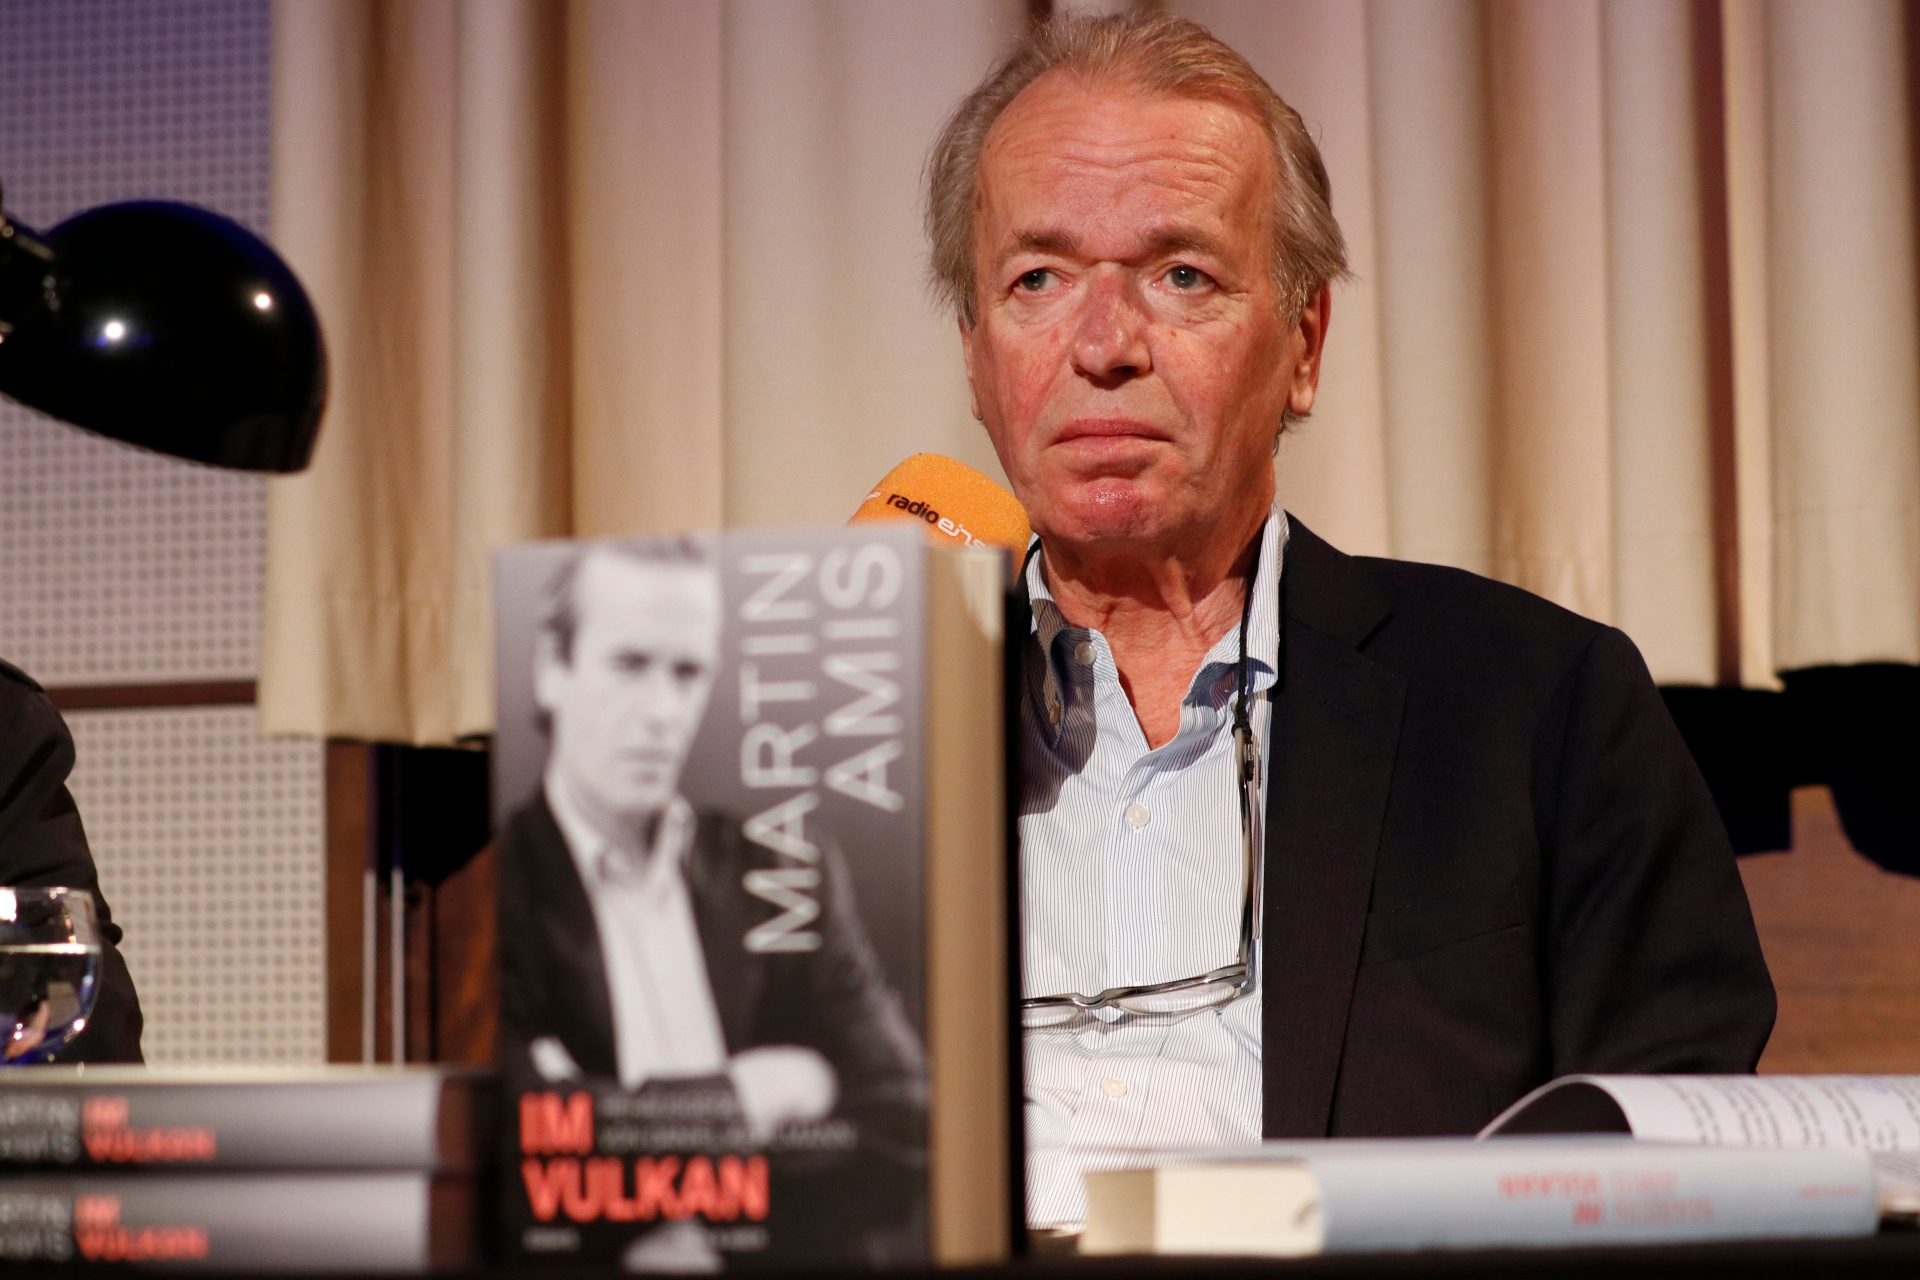 We mourn the loss of celebrated British author Martin Amis